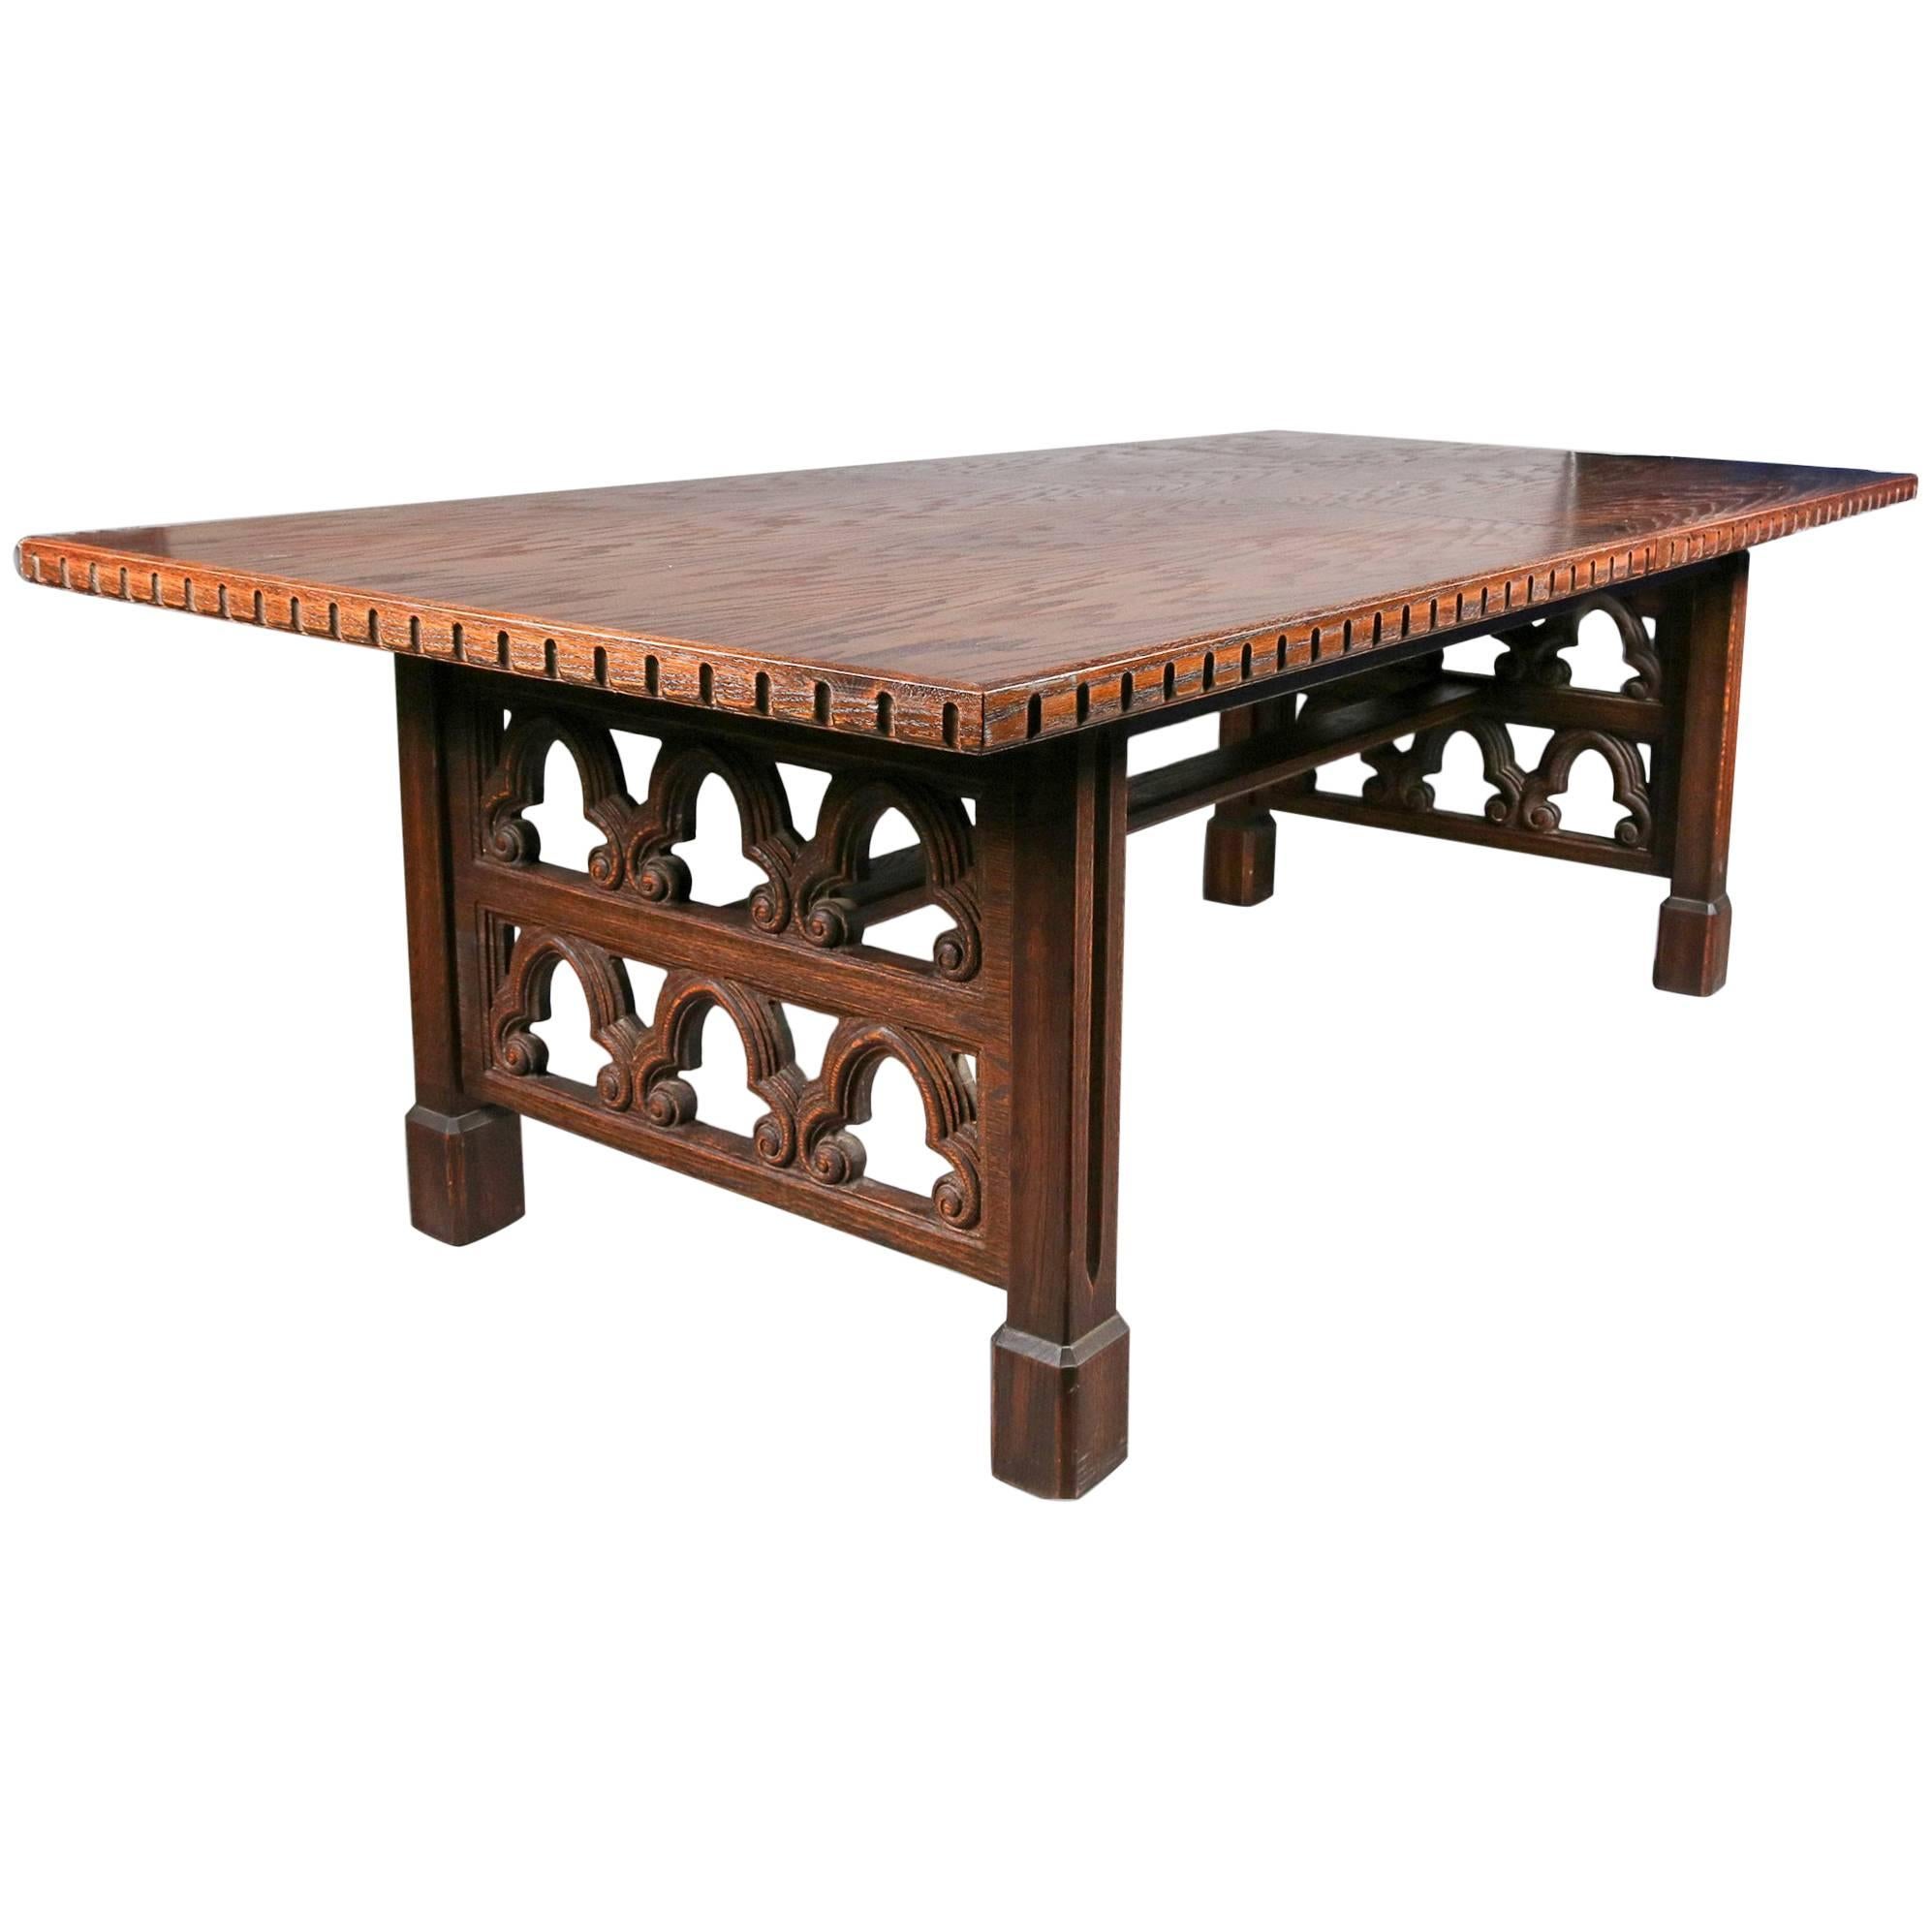 Antique English Carved Walnut Gothic Trestle Table With 2 Leaves, 19th Century